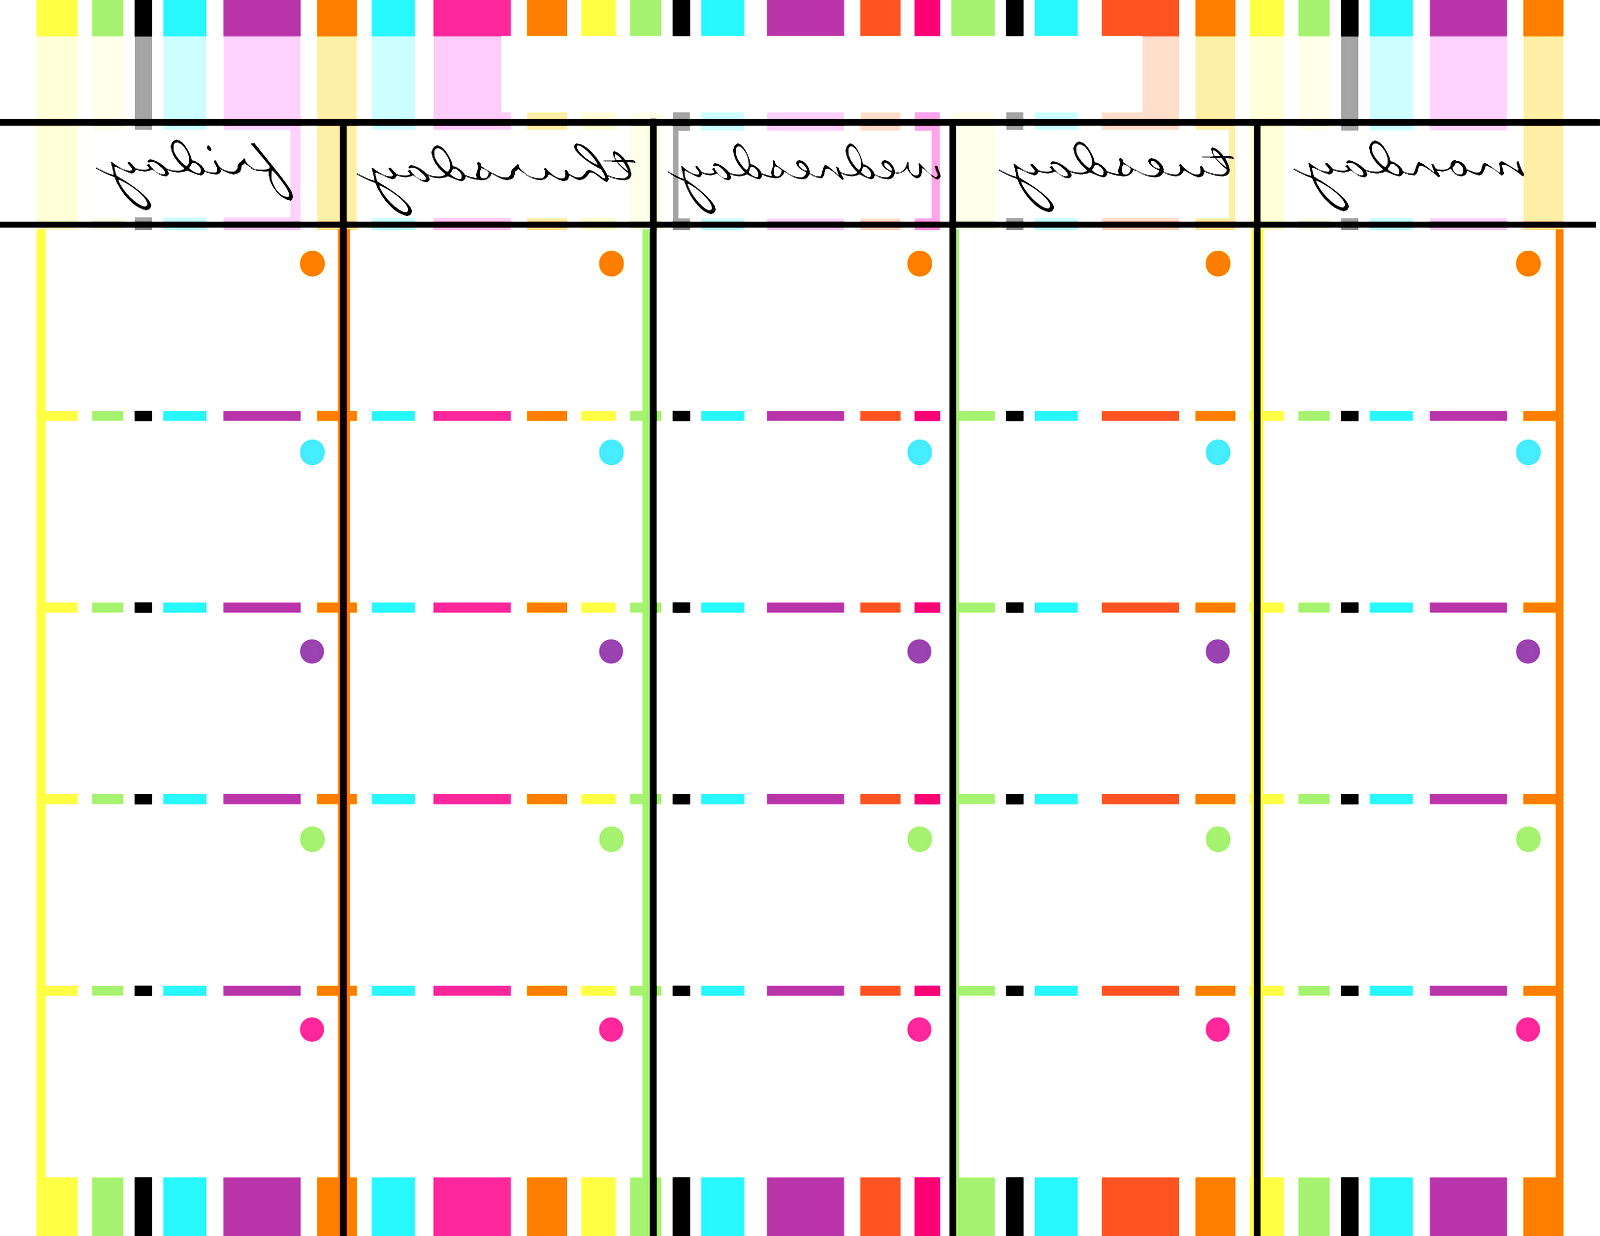 Blank Monday Through Friday Printable Calendar In 2020 | Printable intended for Monday To Friday Template